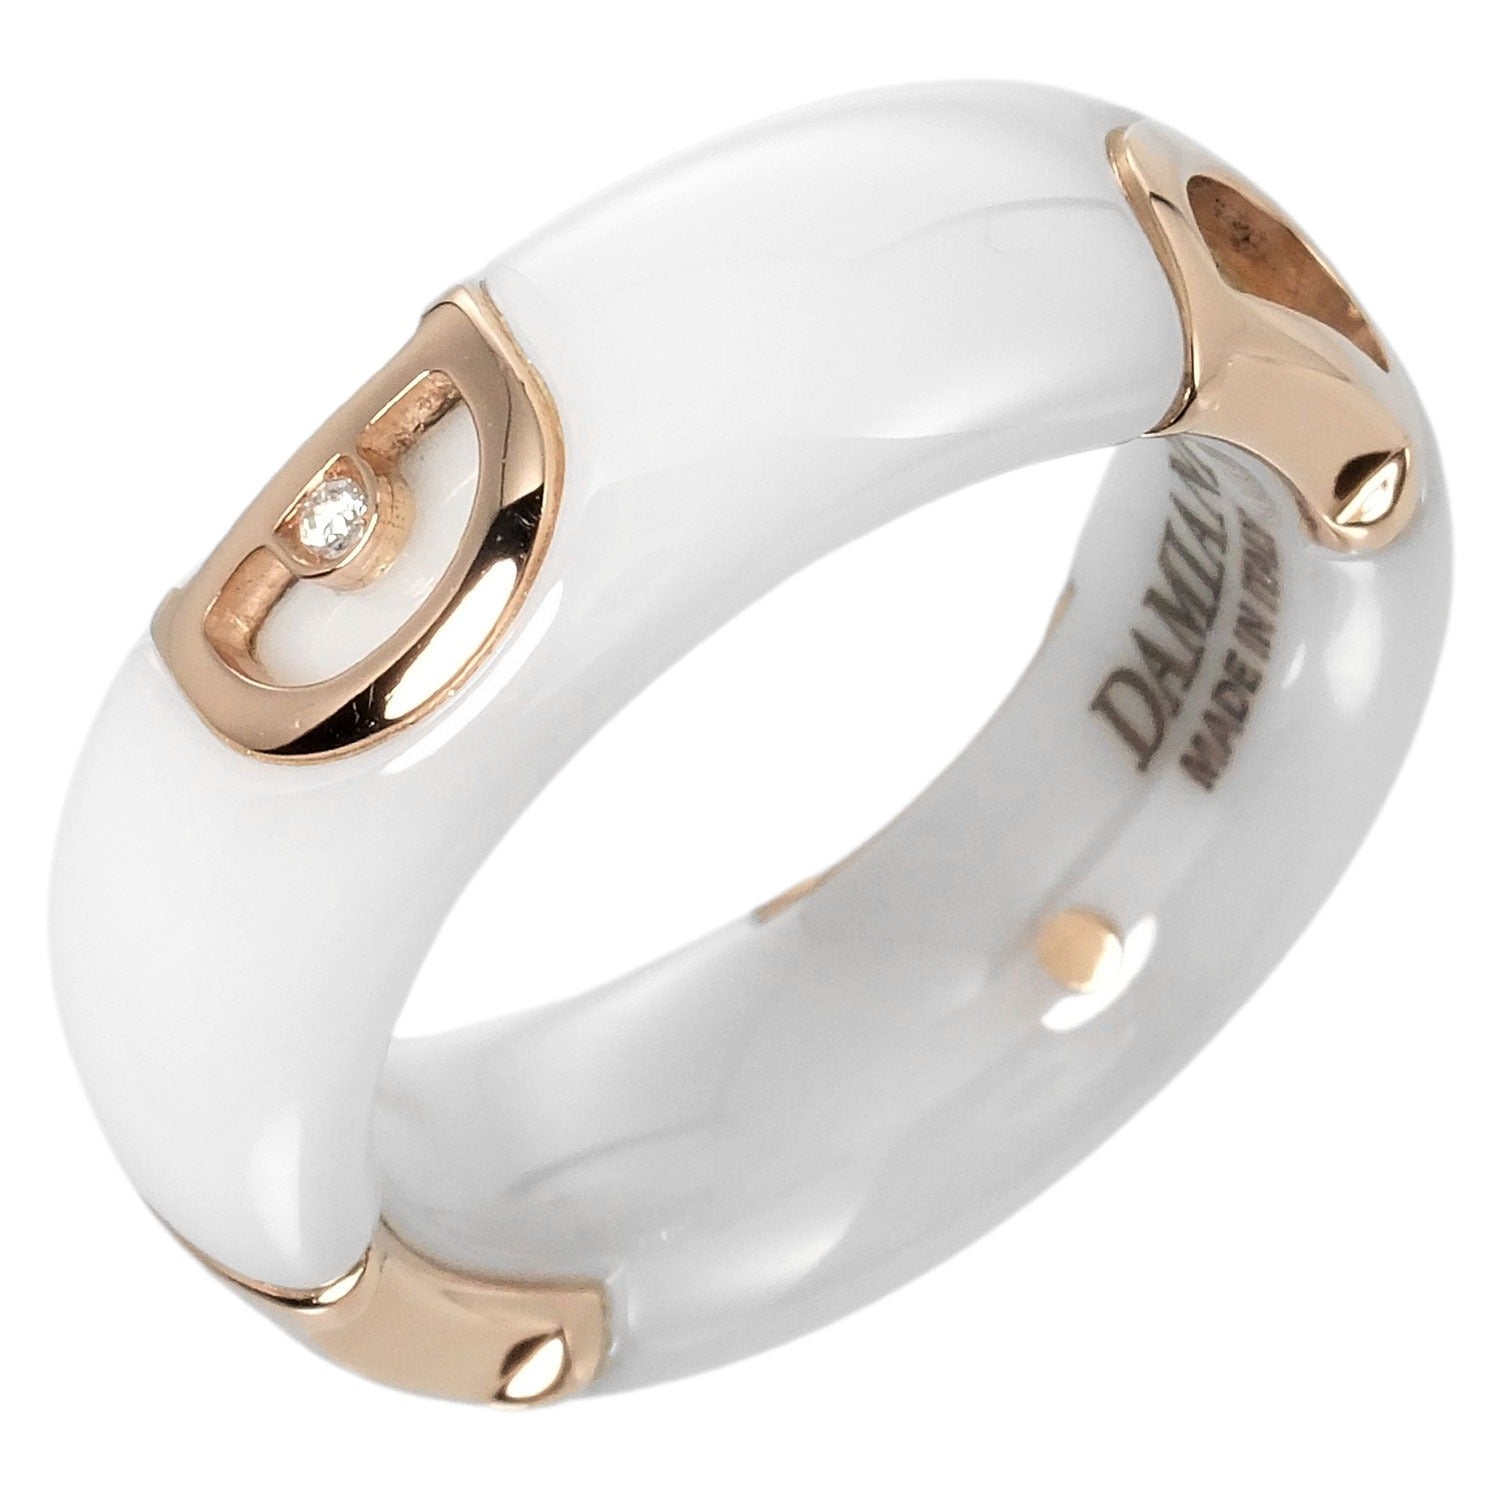 Damiani D.Icon Size 9 Ring with 6.89g Weight, K18 Pink Gold, 1P Diamond & White Ceramic, Pre-Owned Grade A+